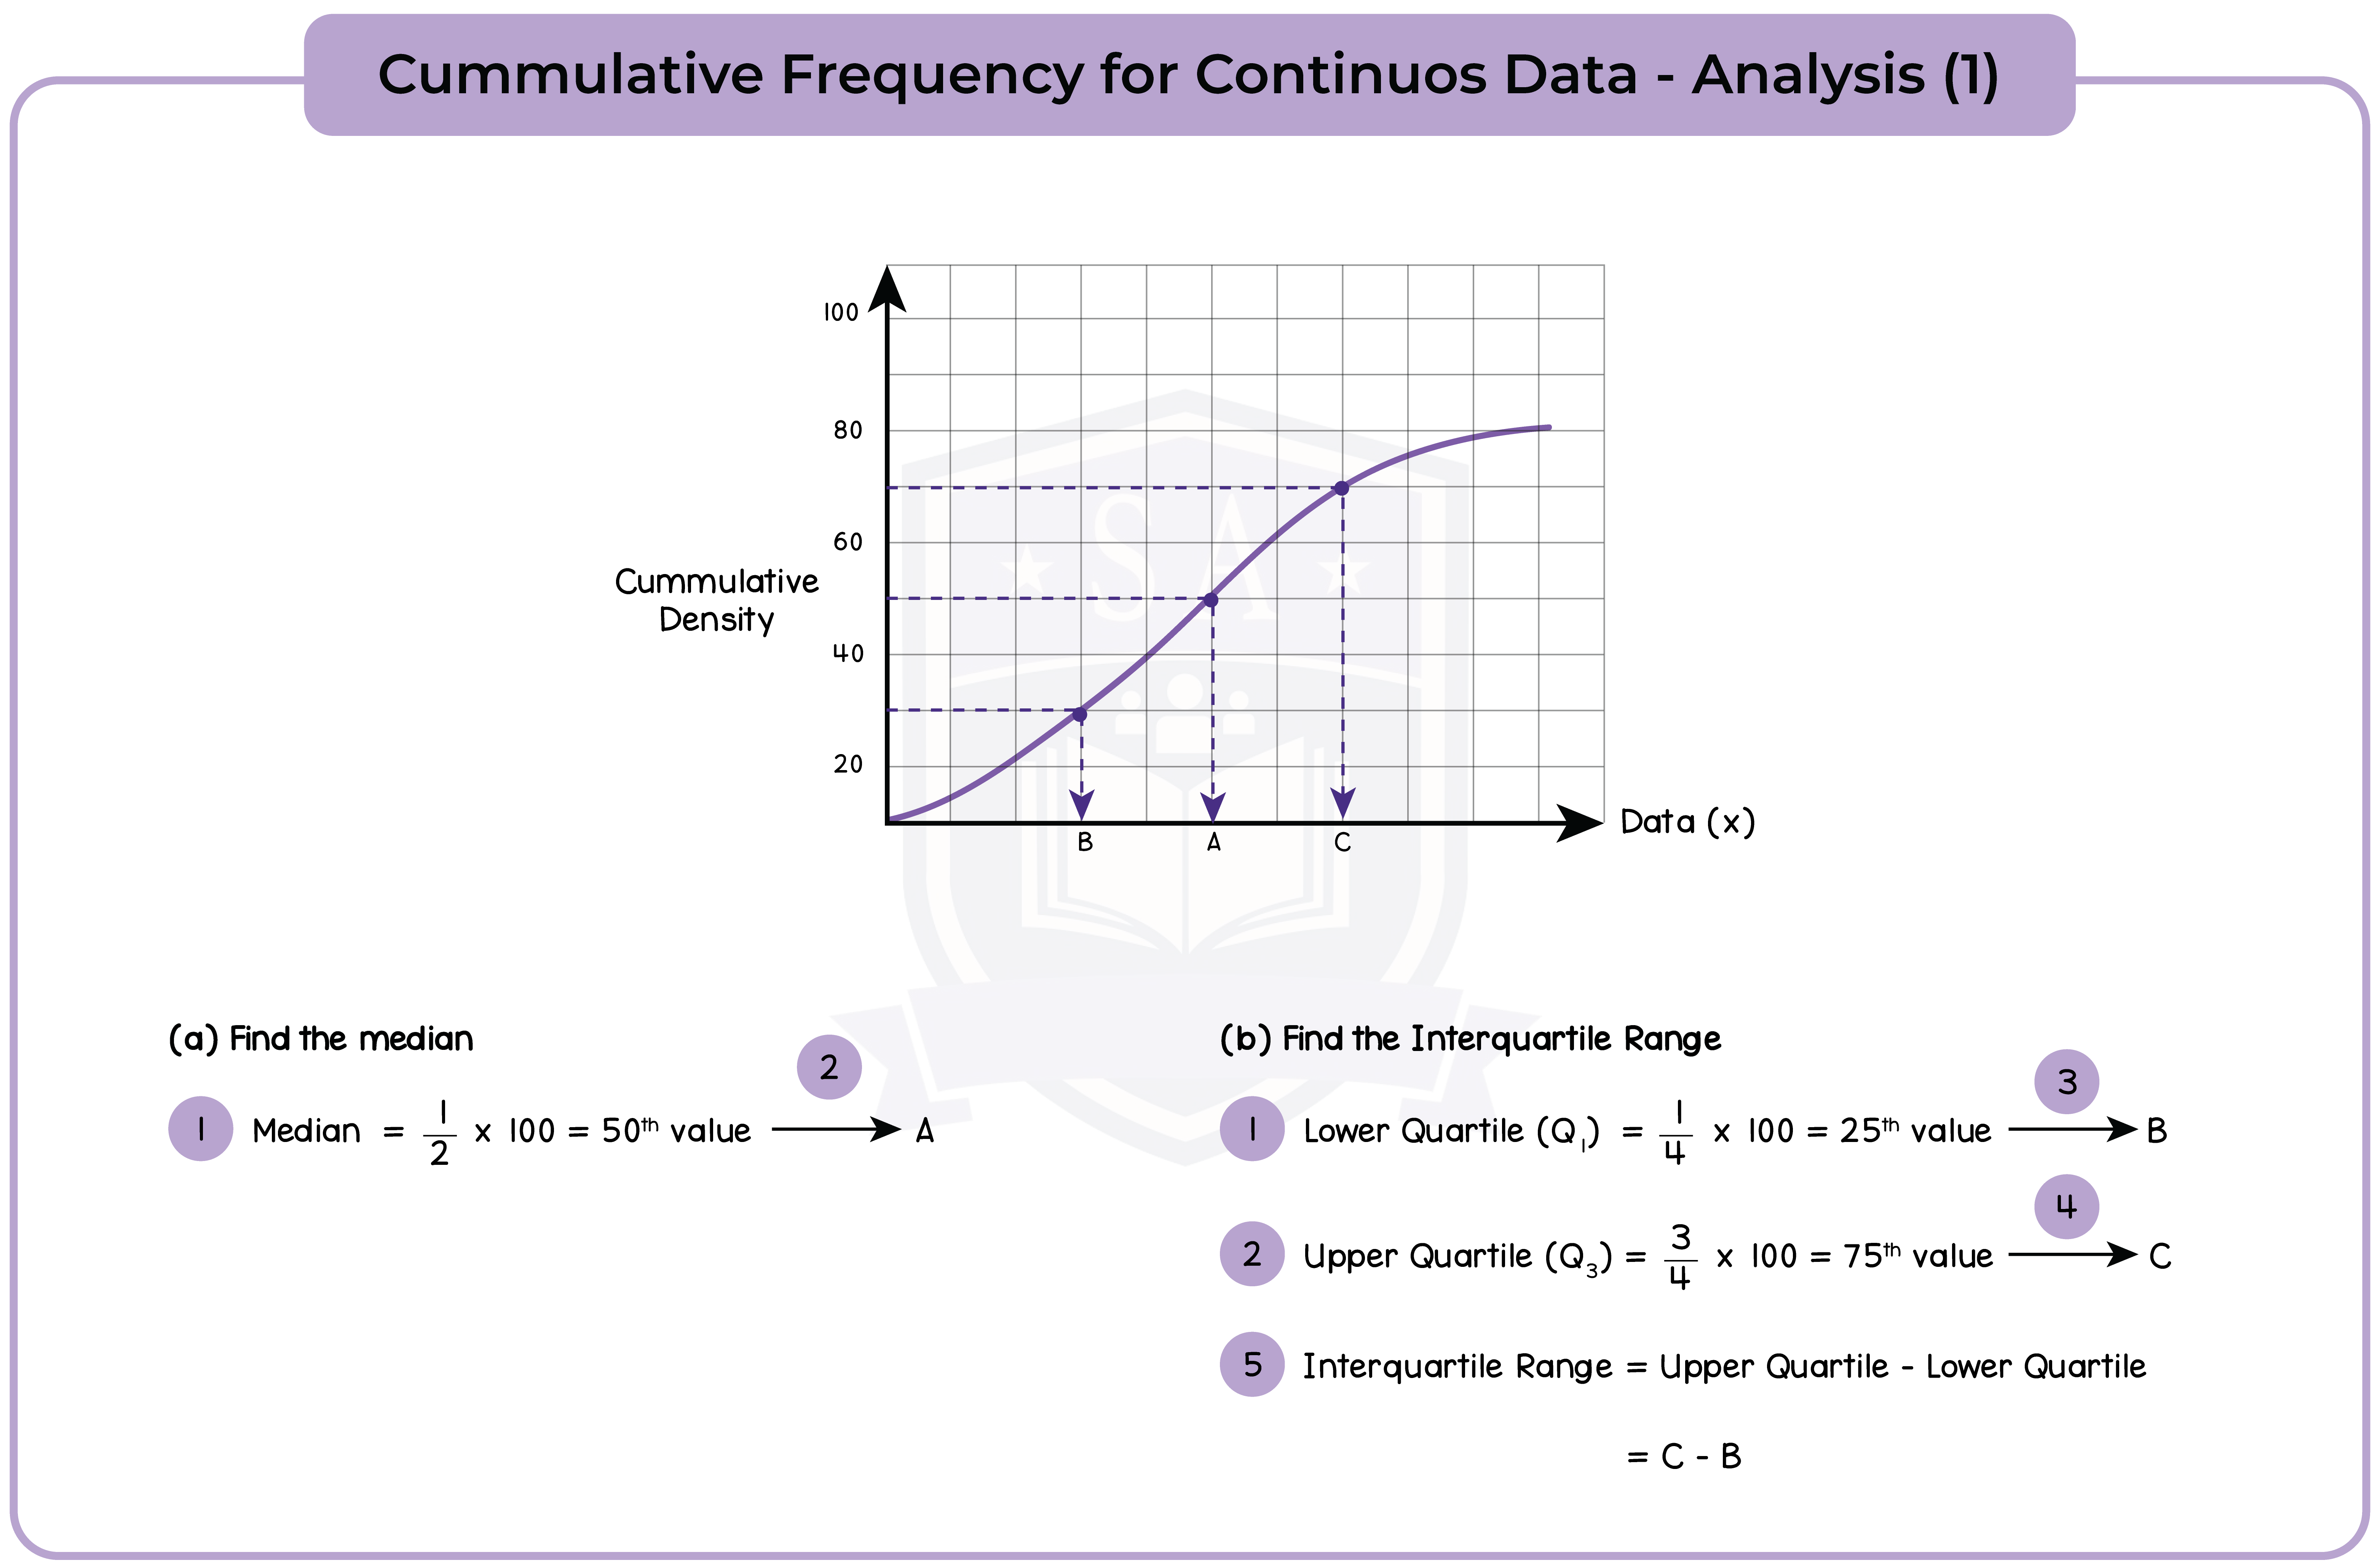 edexcel_igcse_mathematics a_topic 38_graphical representation of data_007_Cummulative Frequency for Continuous Data - Analysis (1)